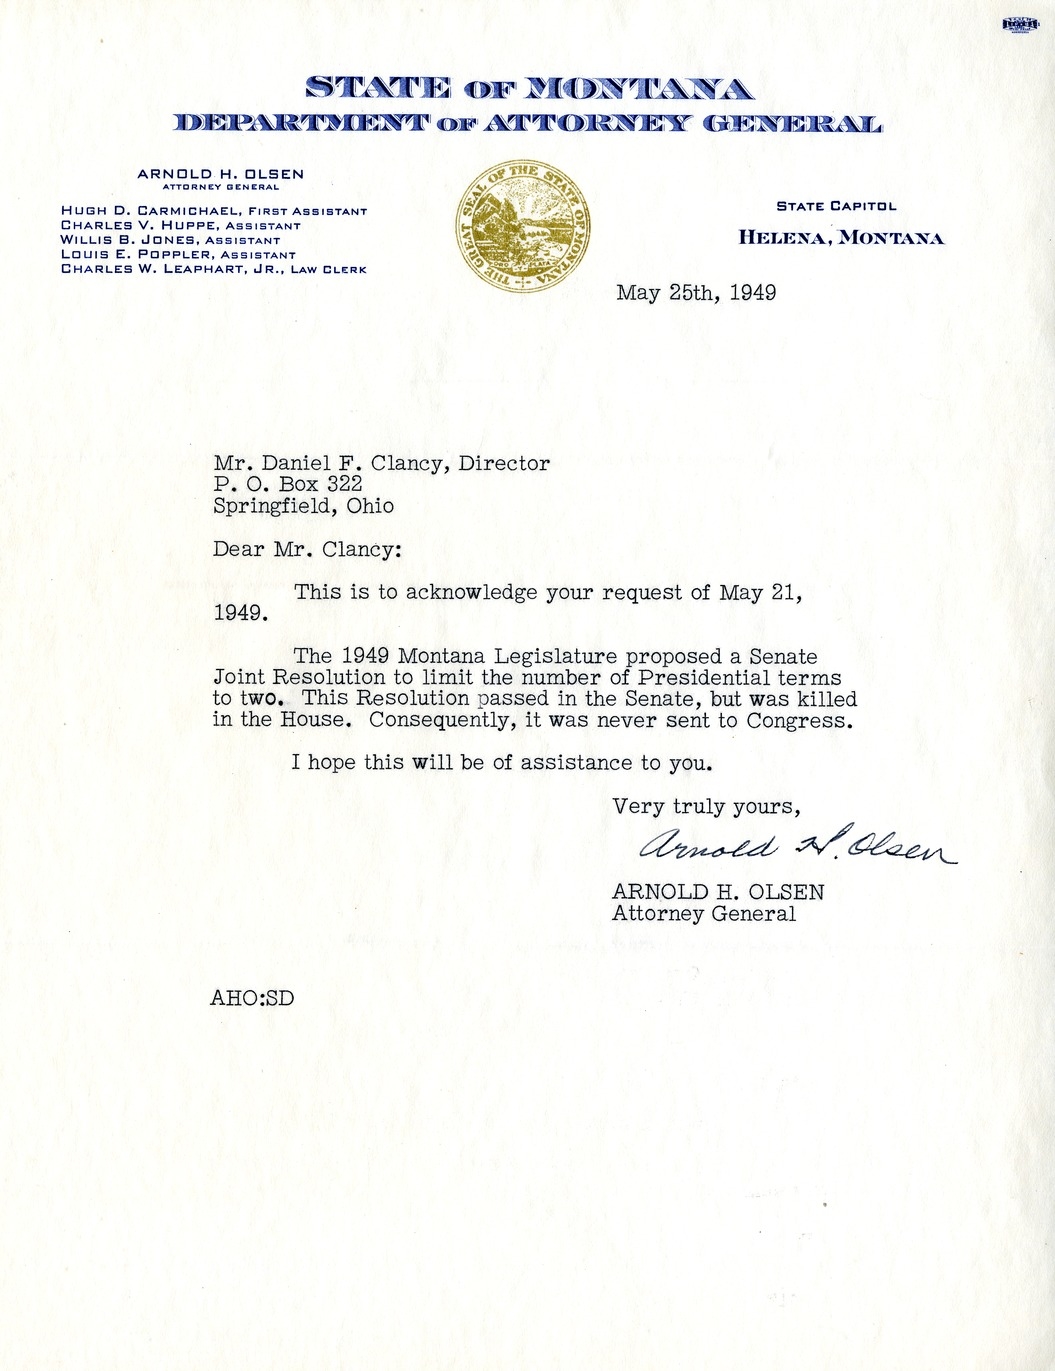 Letter from Arnold H. Olsen to Daniel F. Clancy